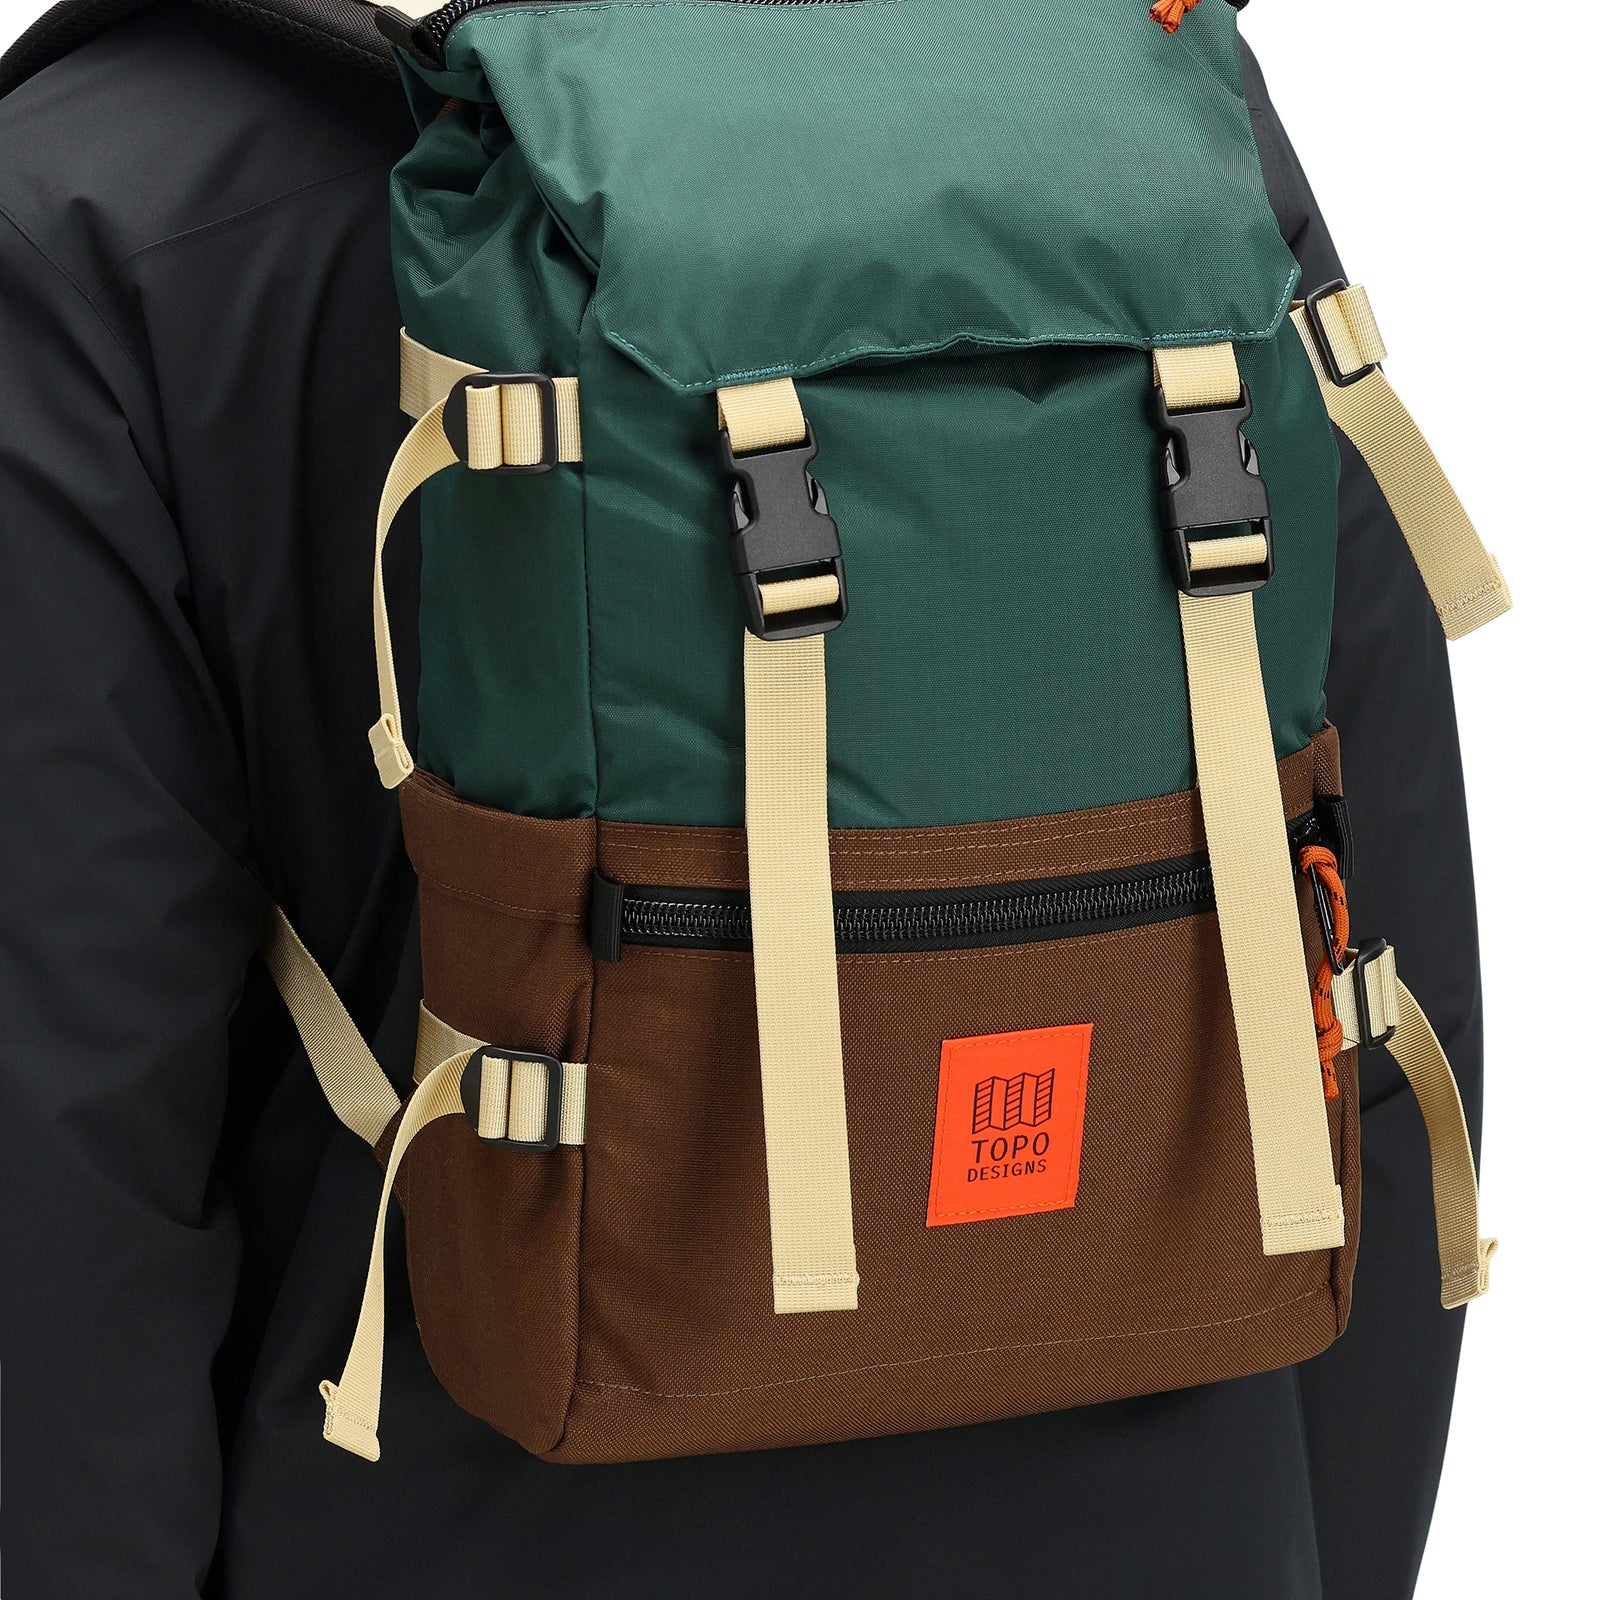 Detail back model shot of Topo Designs Rover Pack Classic laptop backpack in recycled "Forest / Cocoa" green brown.